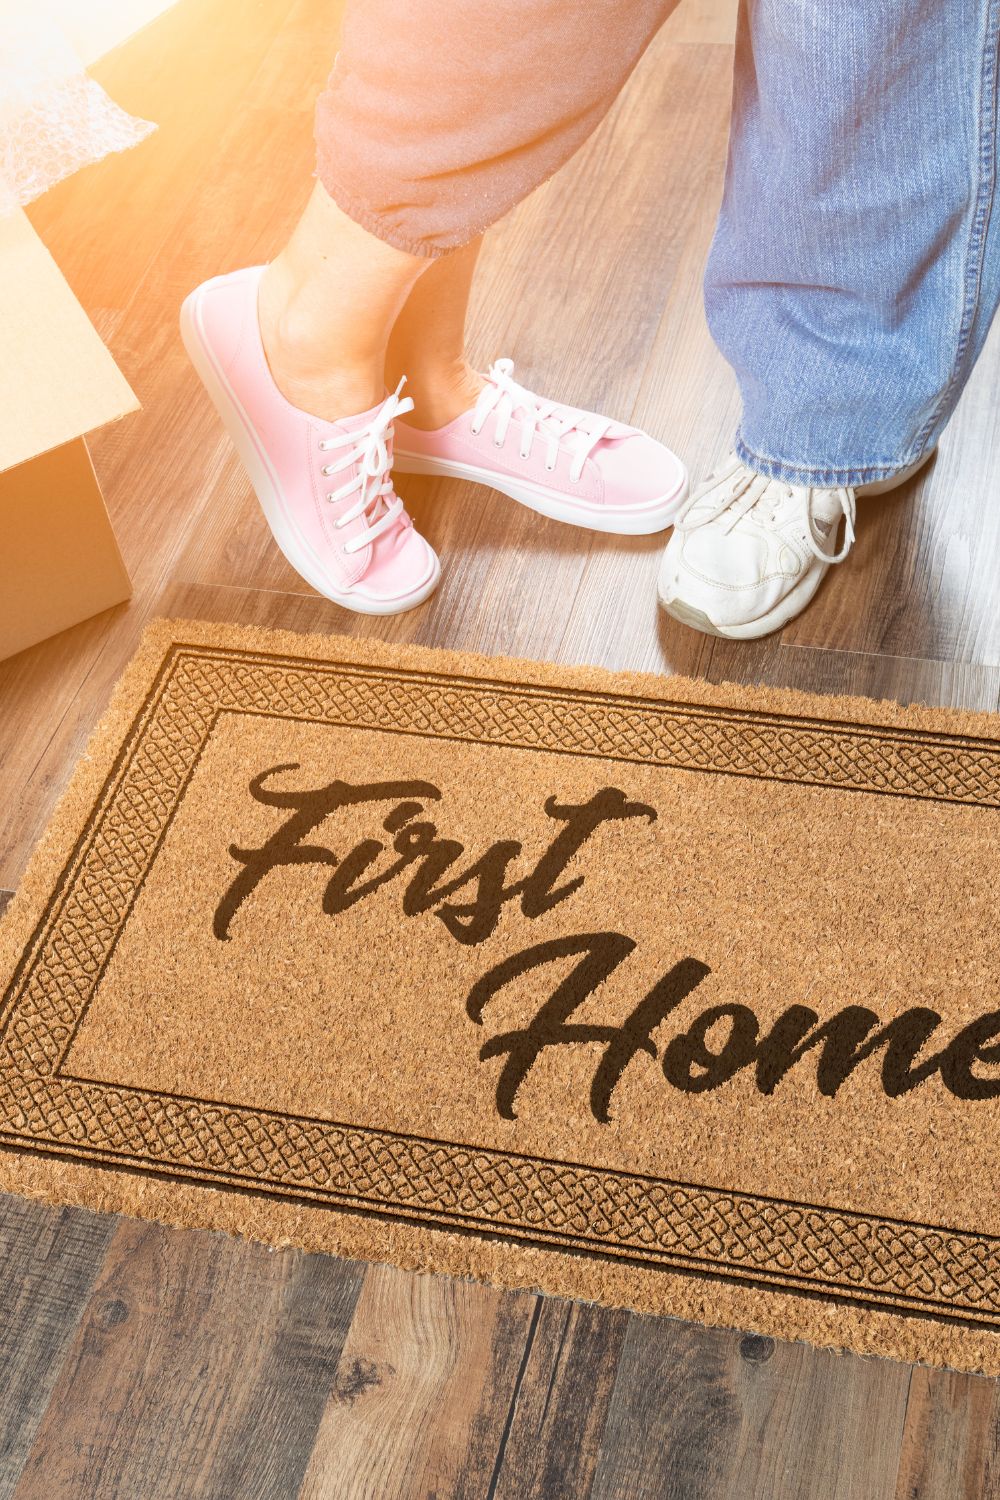 Things to keep in mind for your first family home 